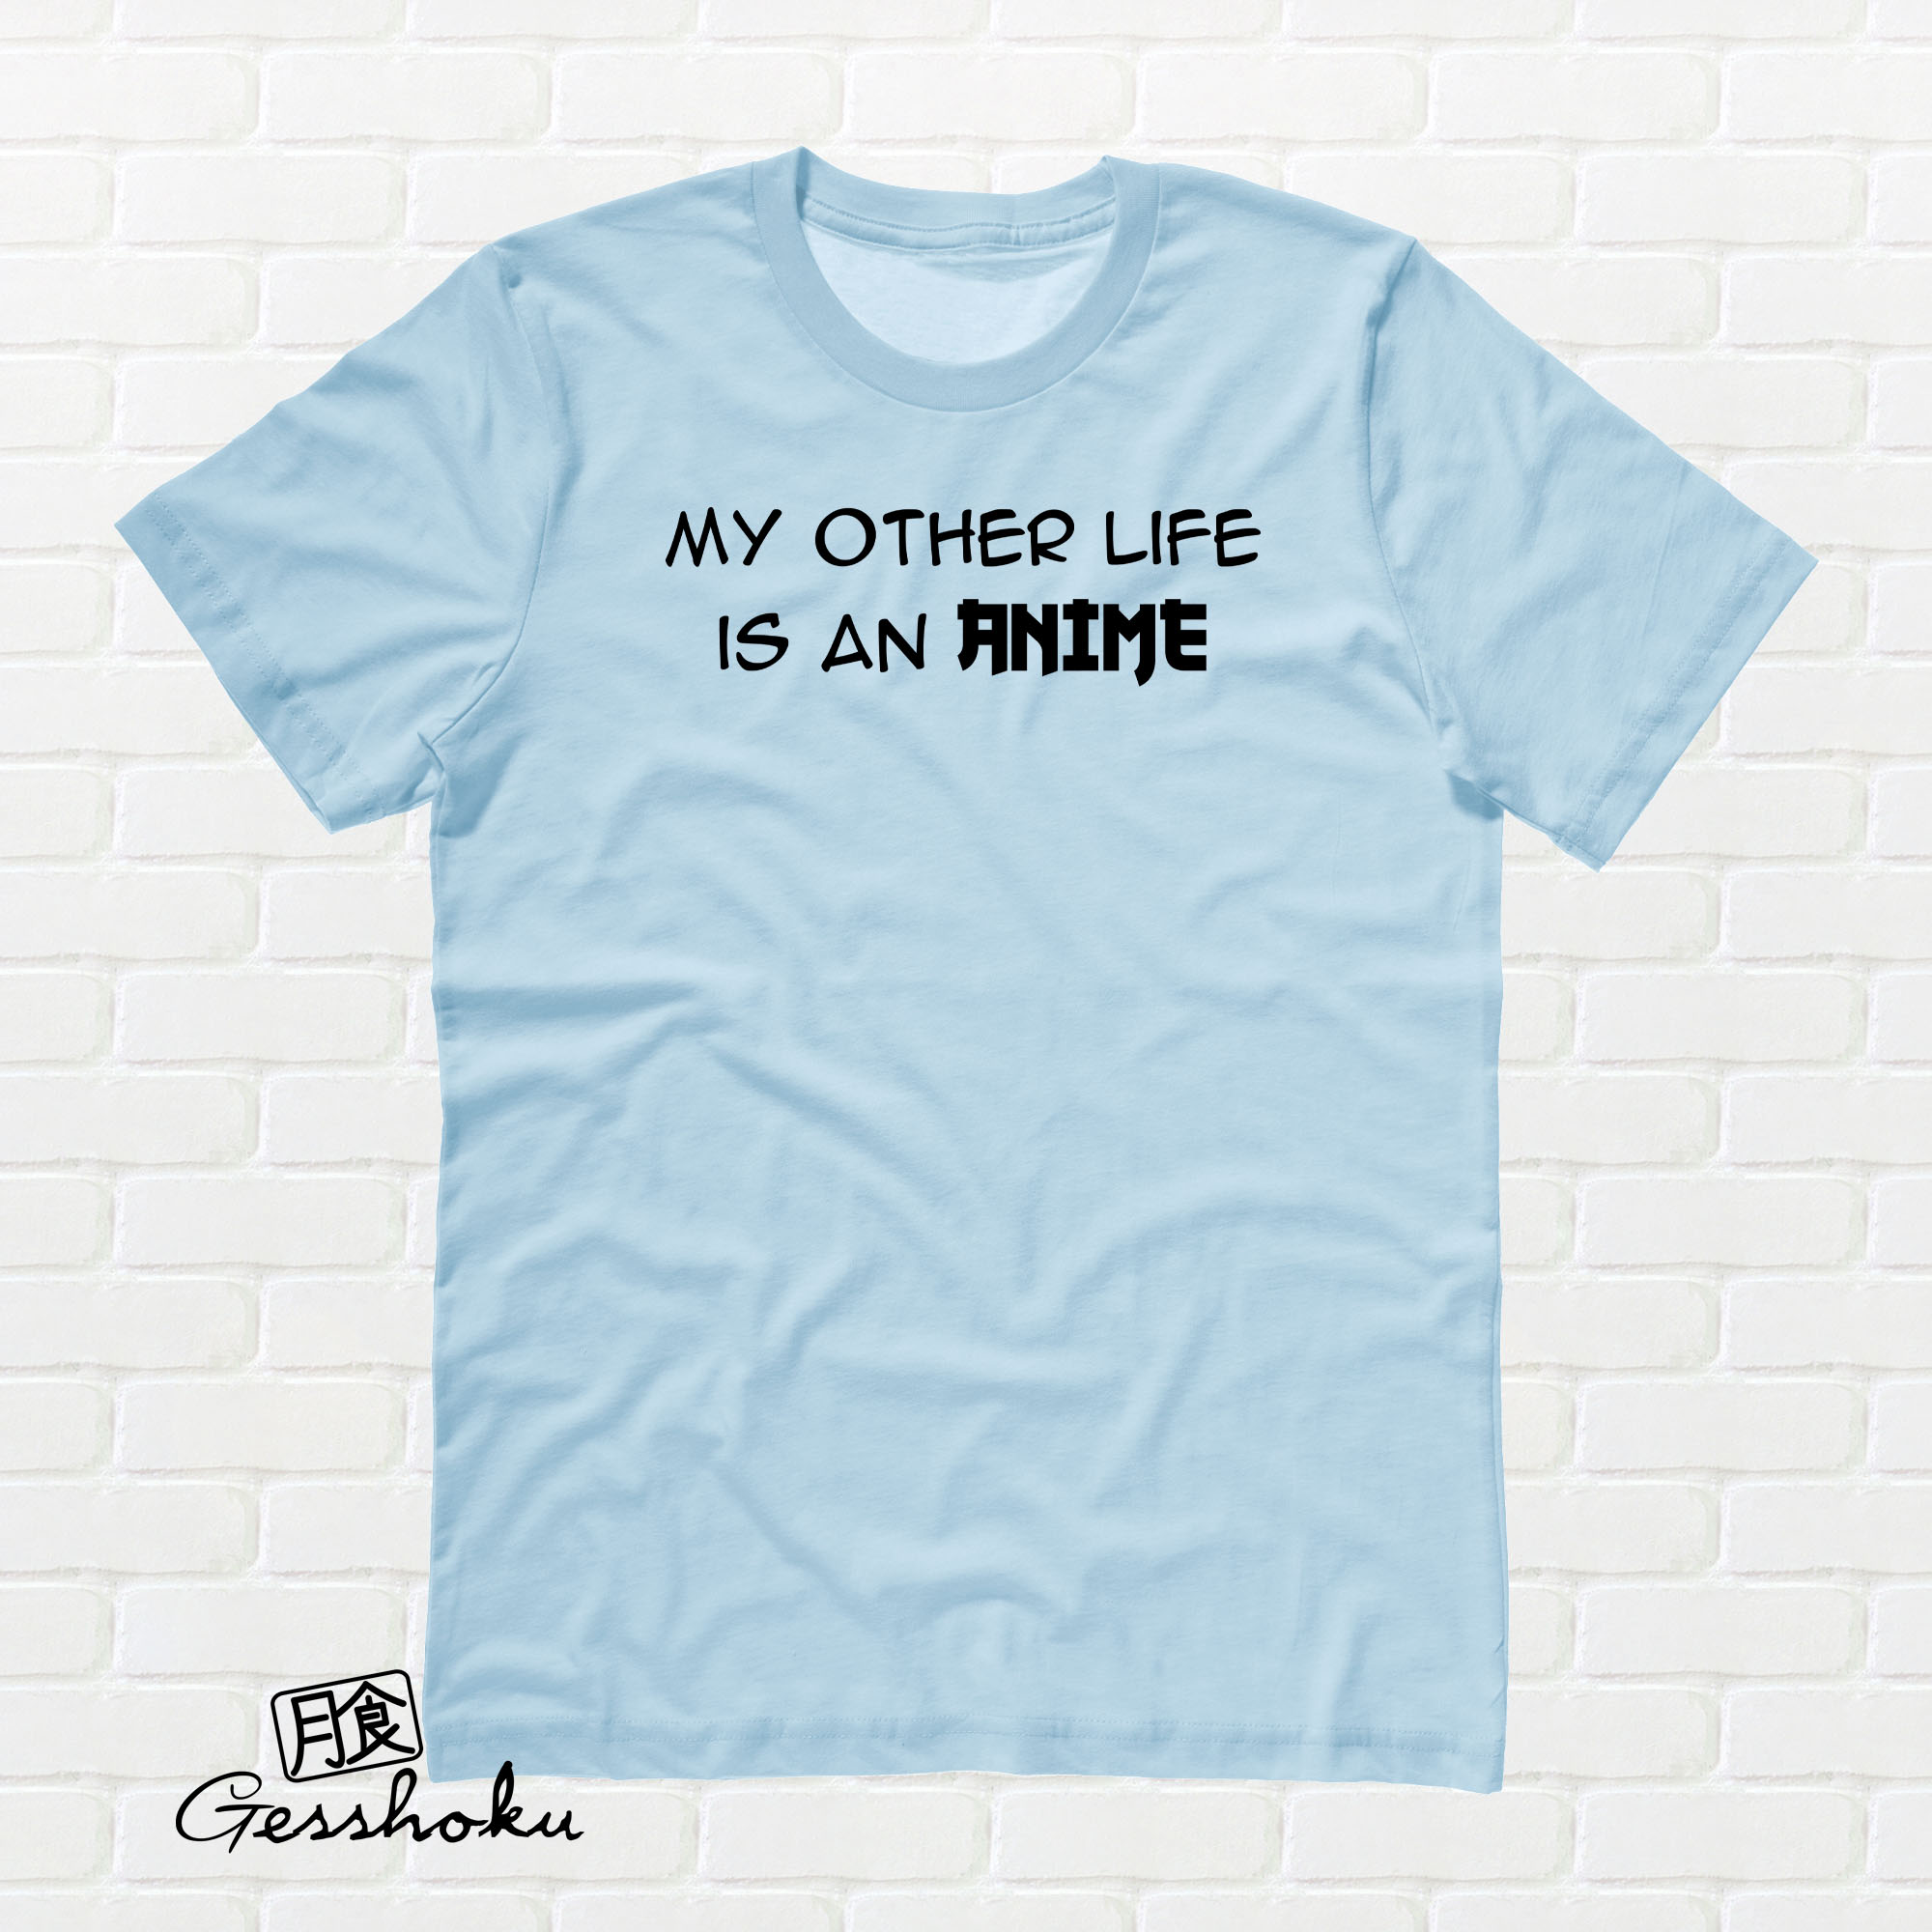 My Other Life is an Anime T-shirt - Light Blue